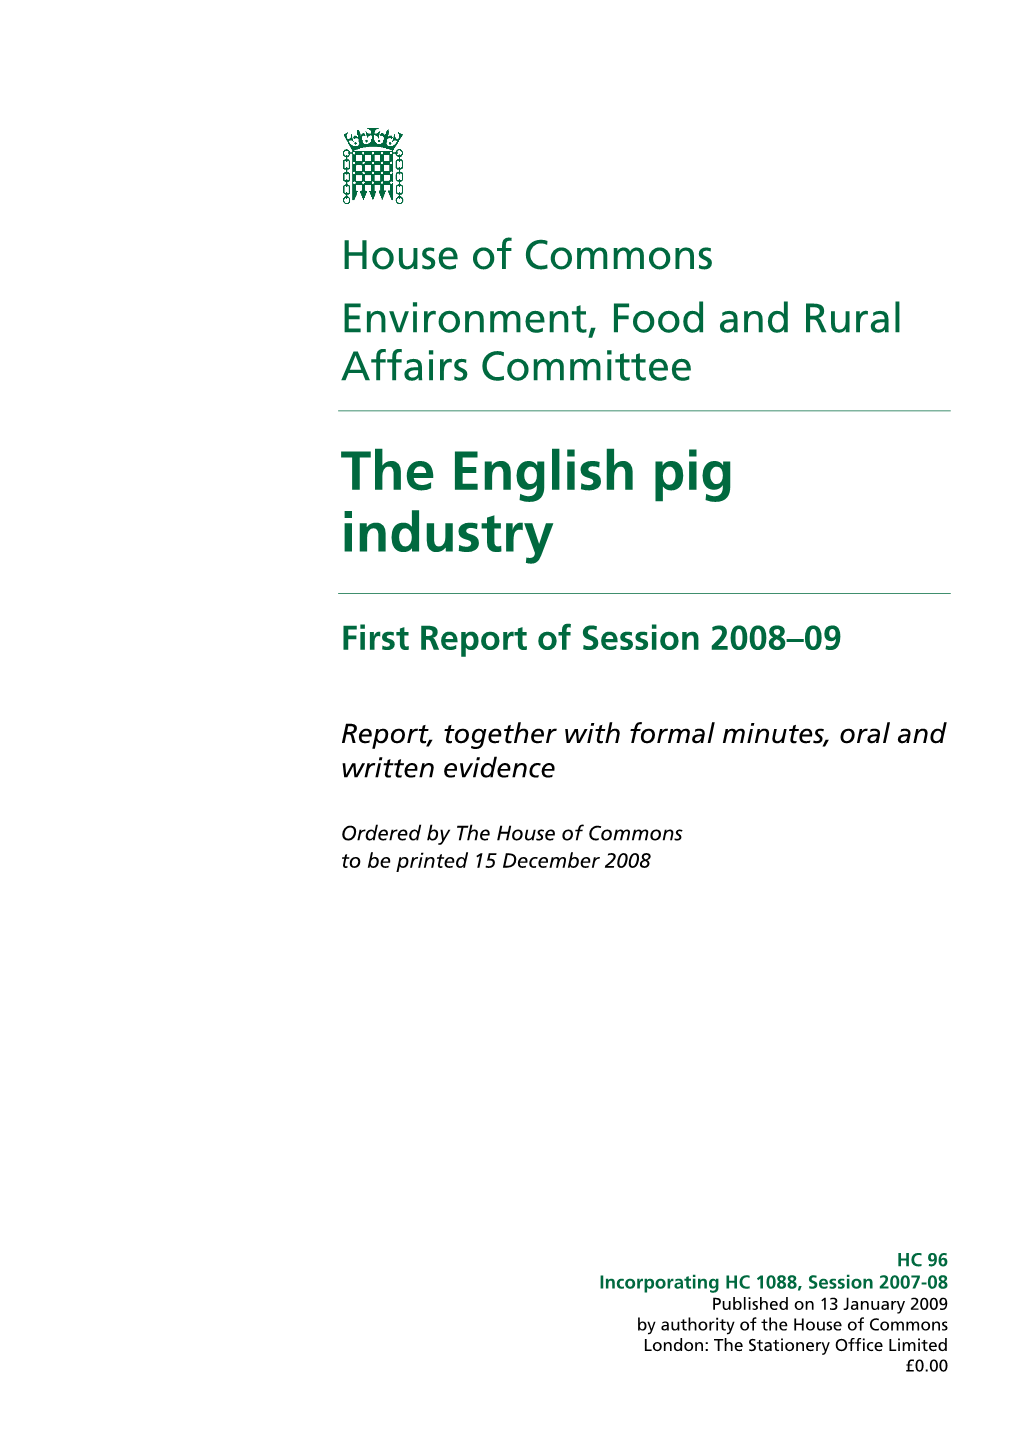 The English Pig Industry